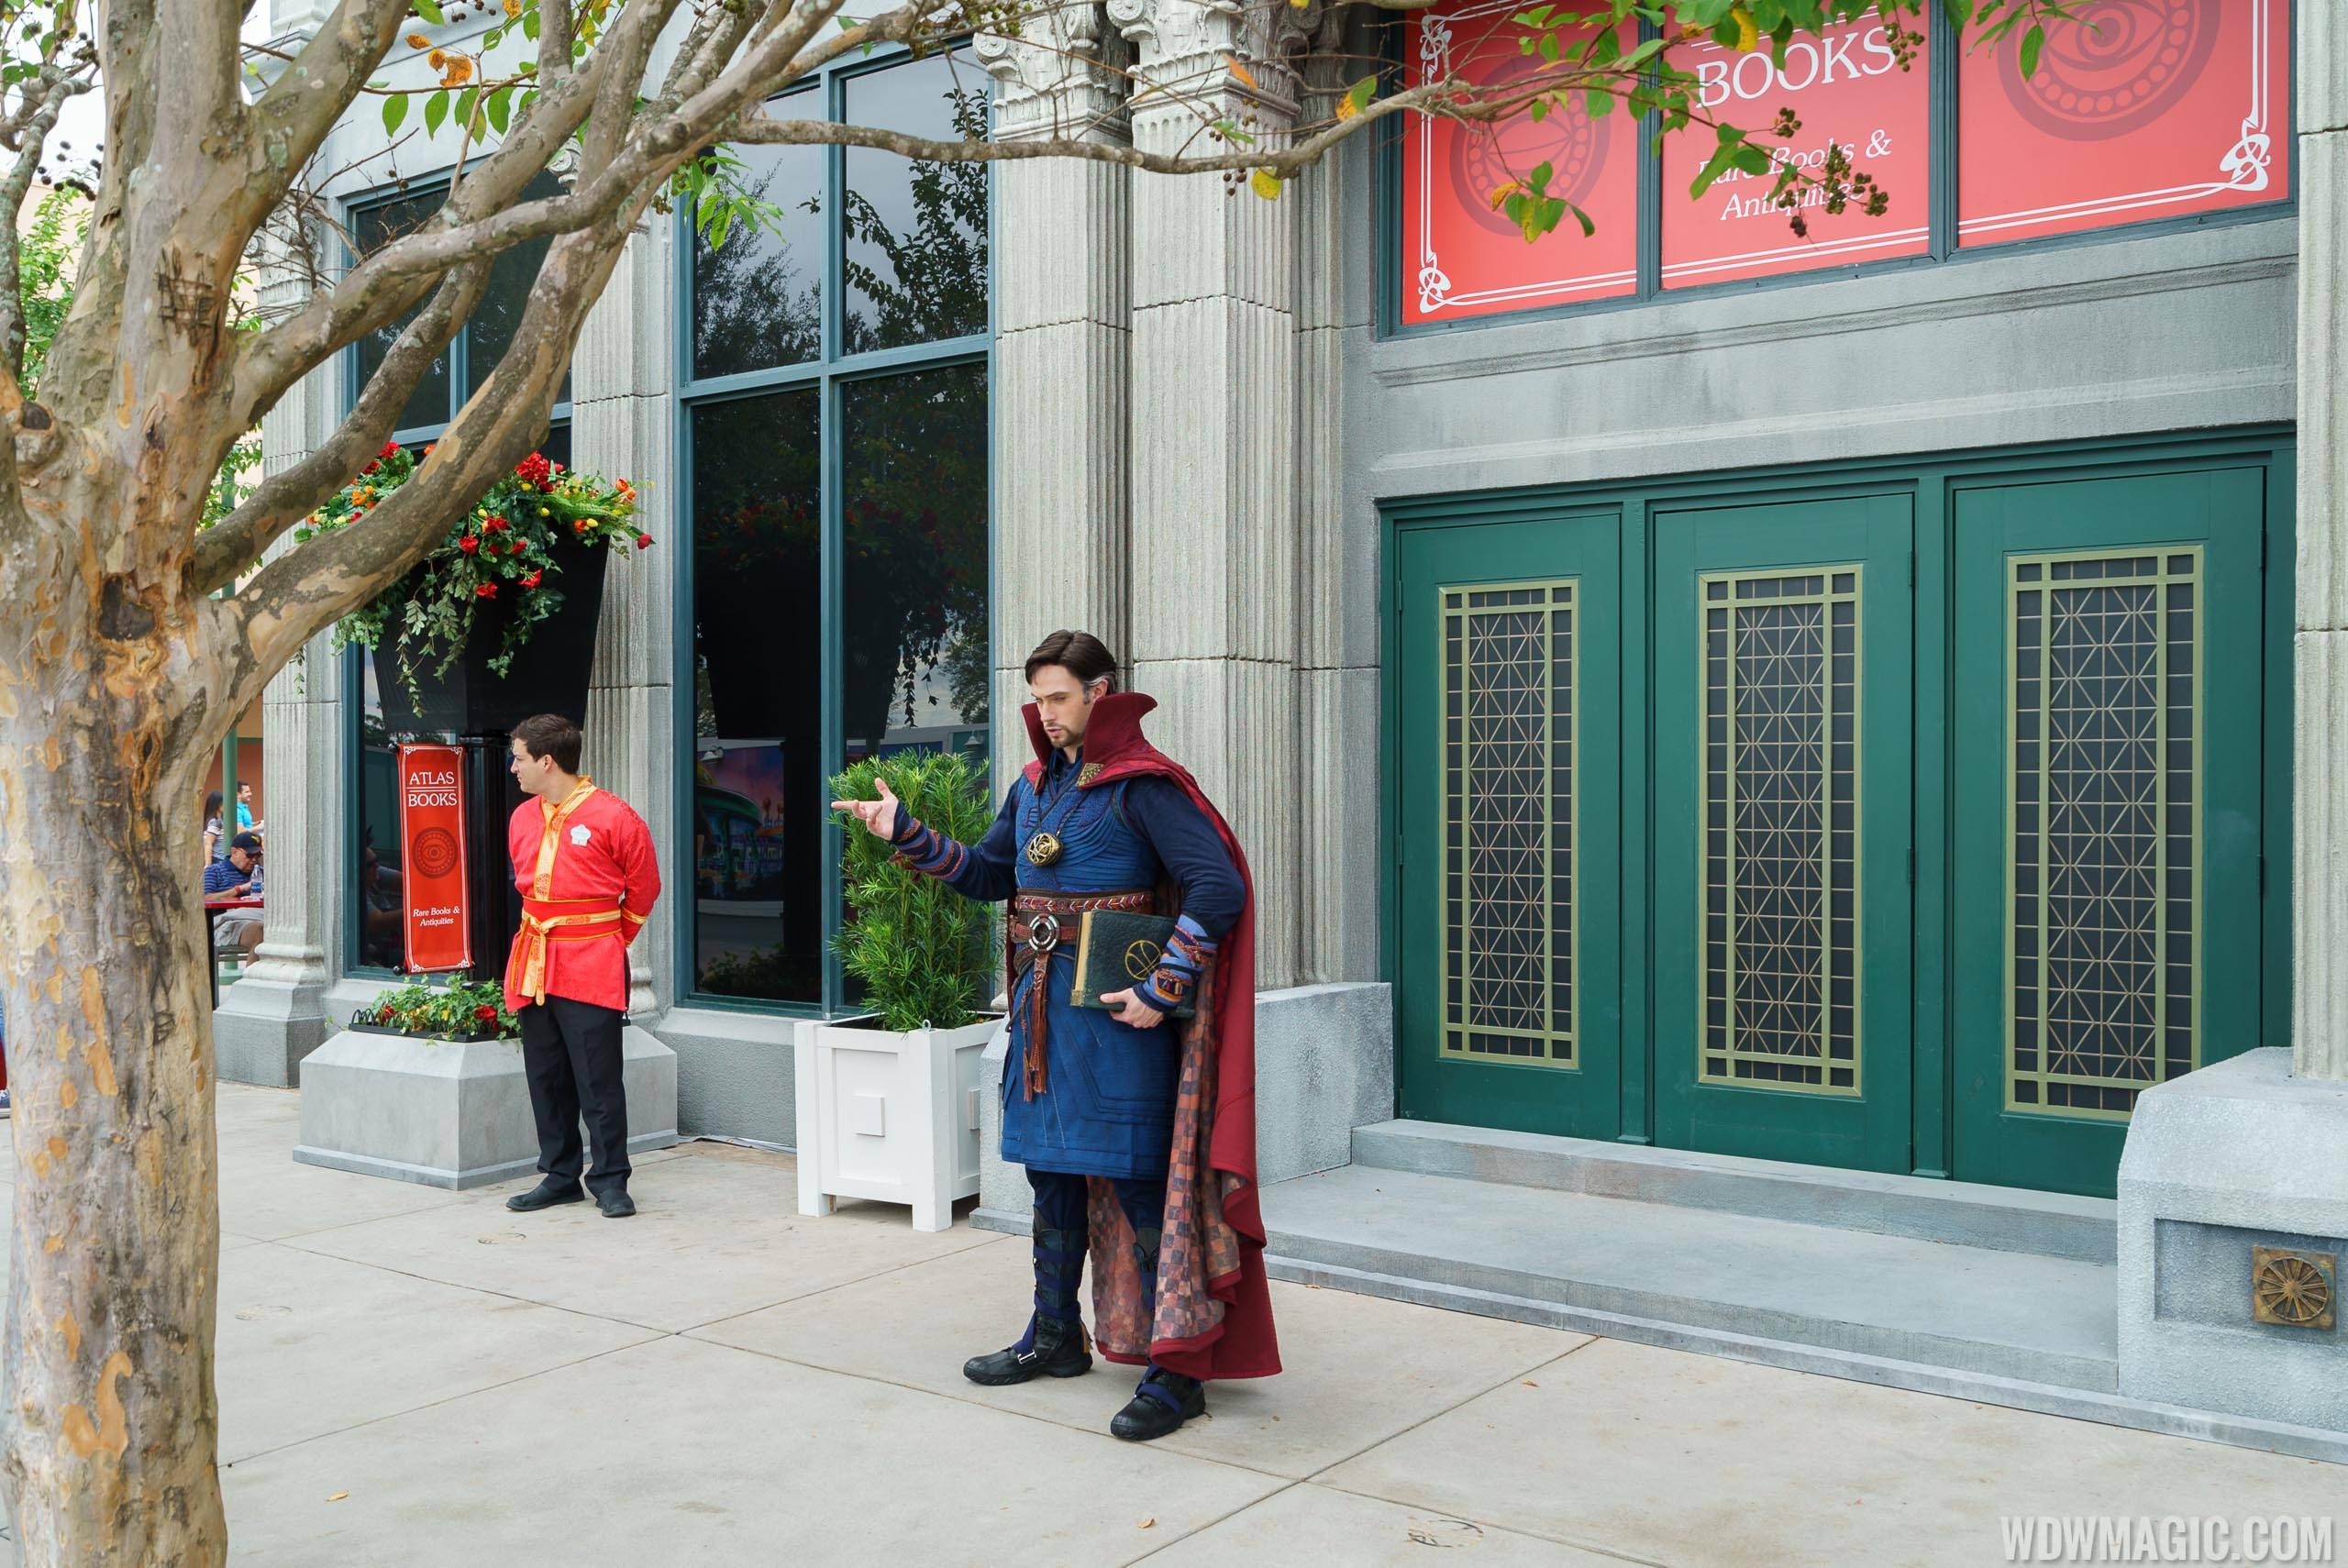 PHOTOS - Doctor Strange character experience at Disney's Hollywood Studios